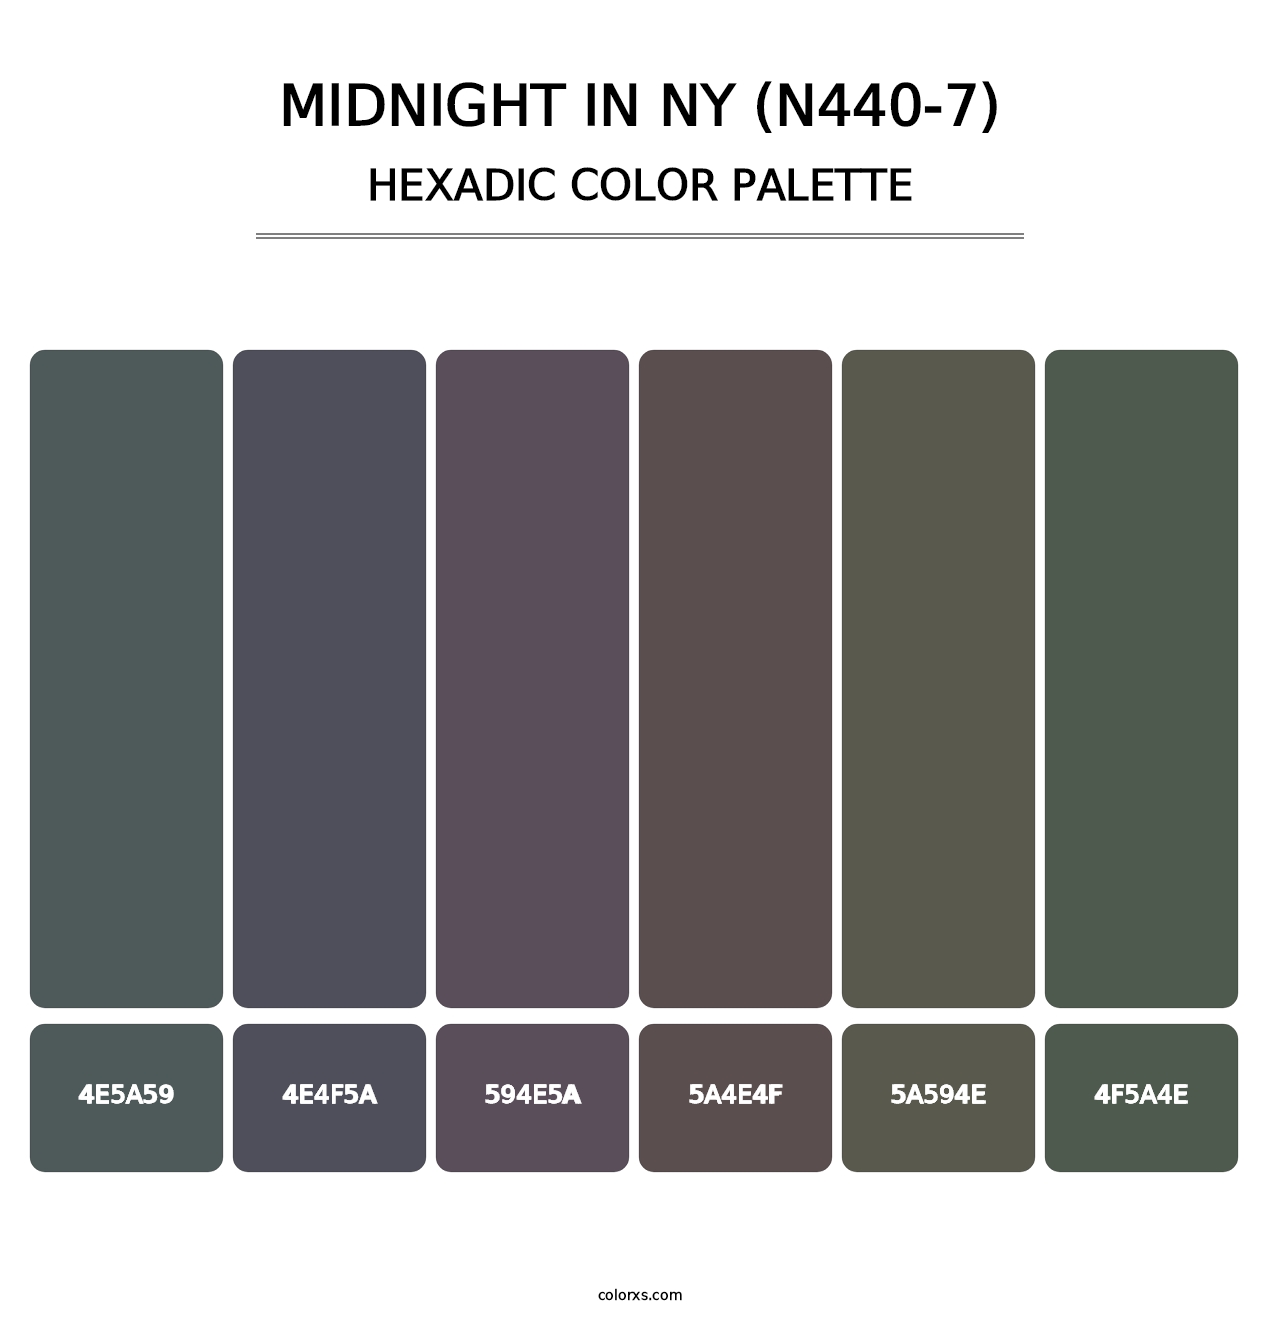 Midnight In Ny (N440-7) - Hexadic Color Palette